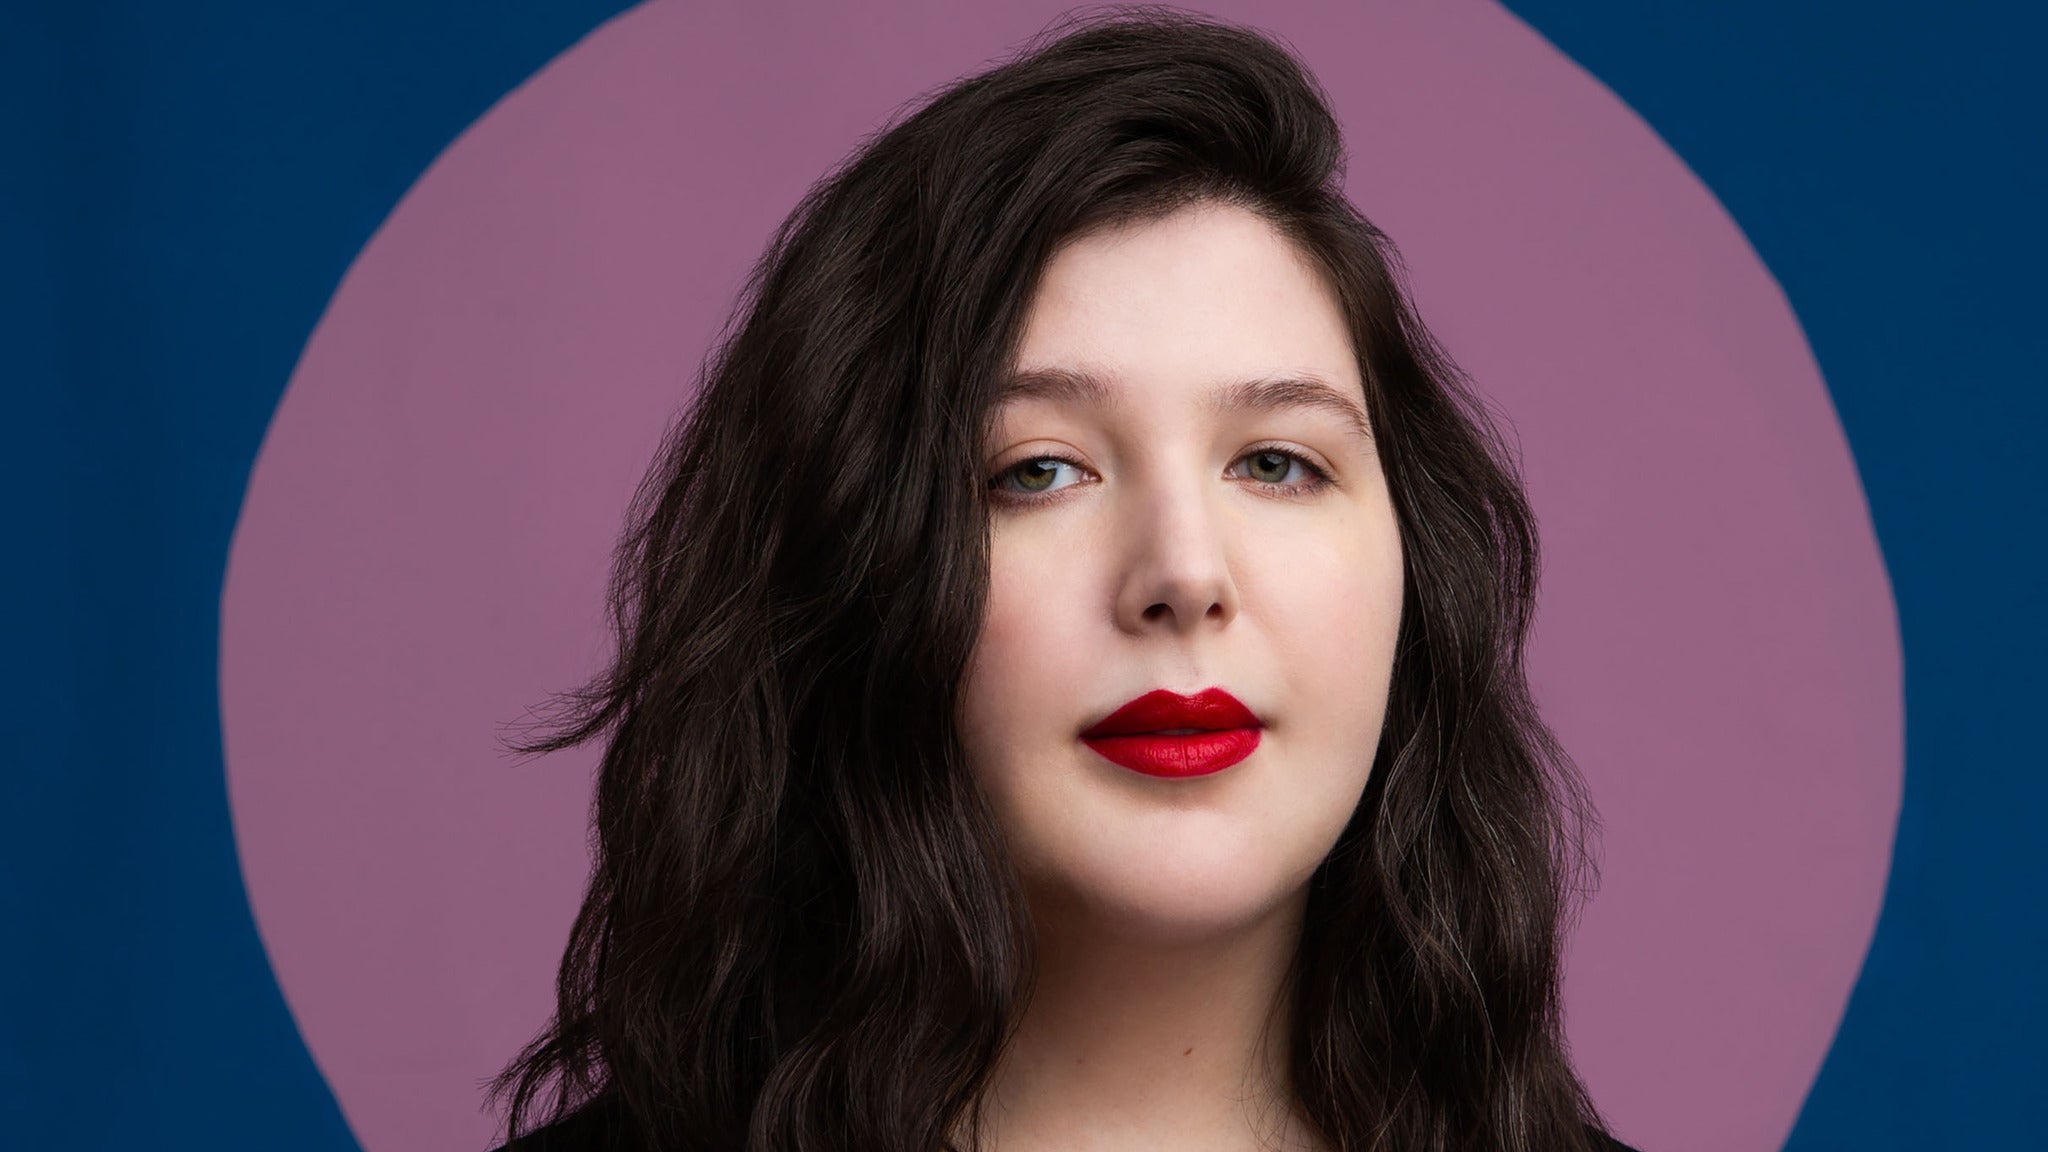 Lucy Dacus in Santa Ana promo photo for Live Nation presale offer code